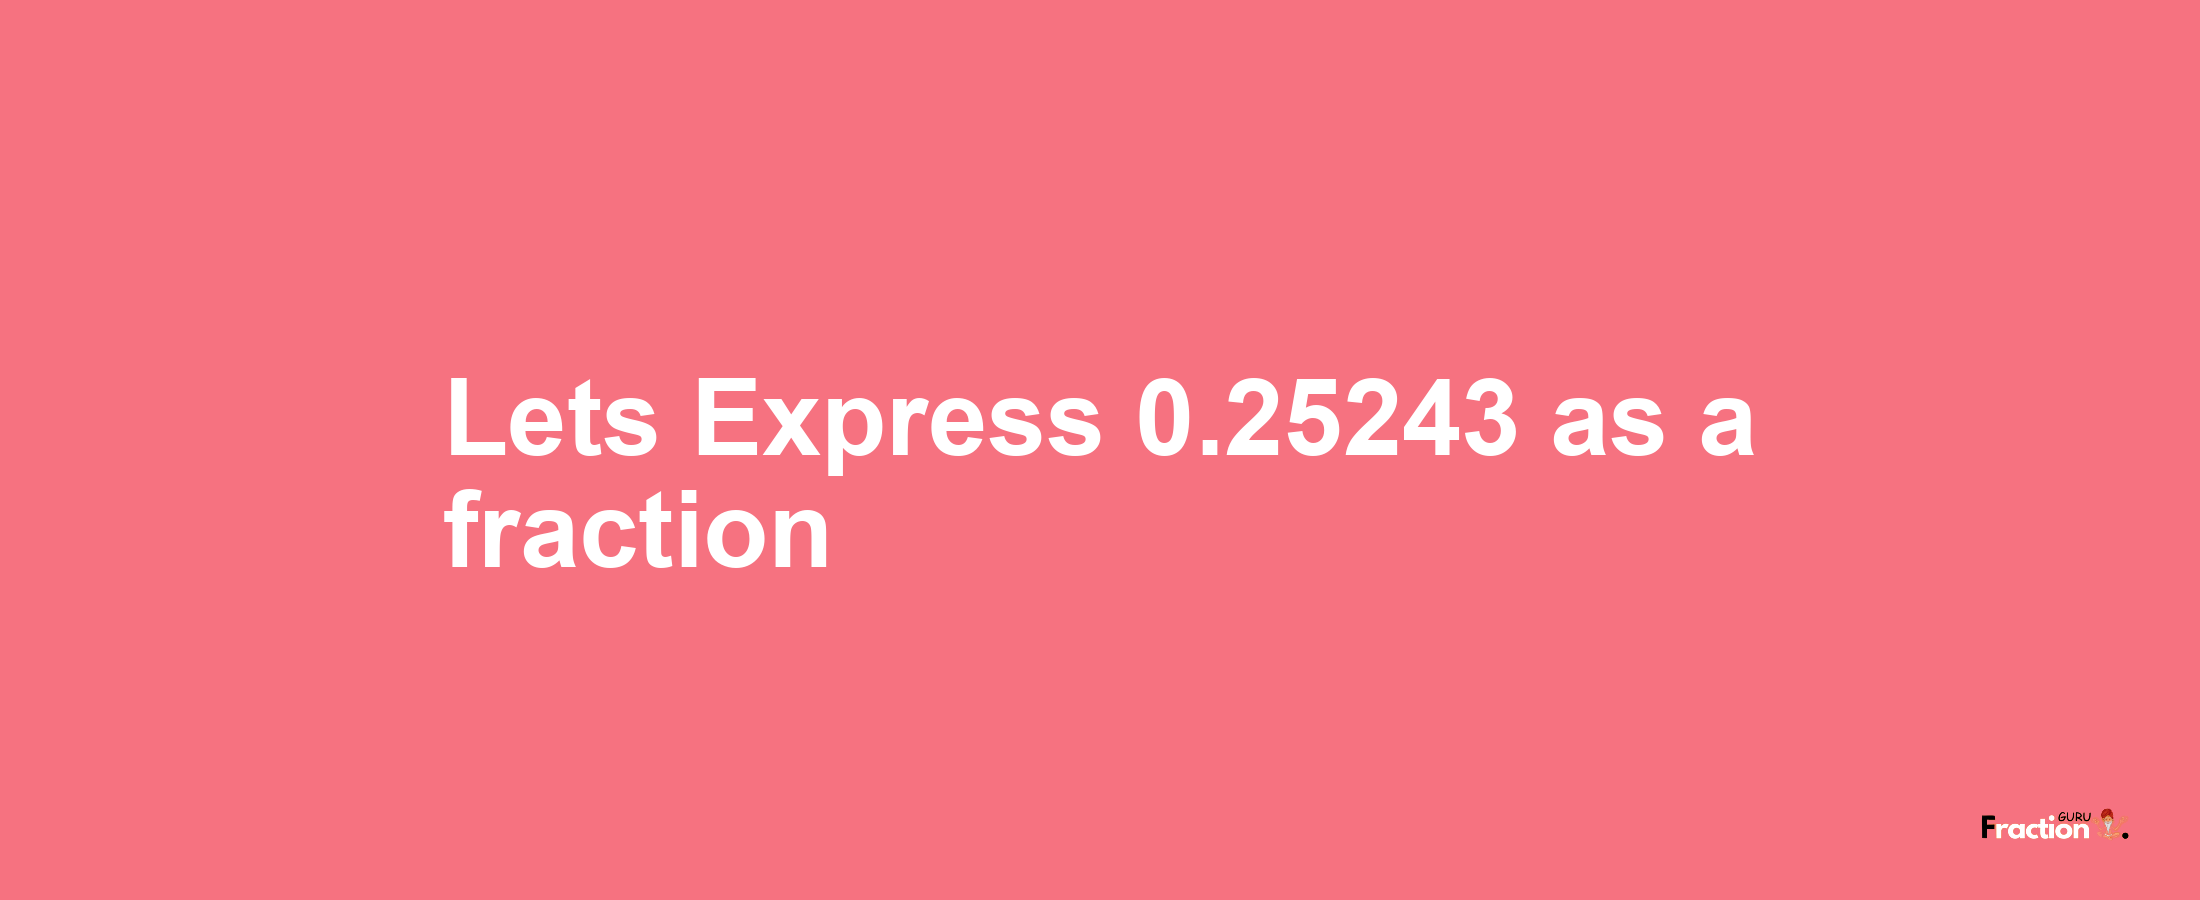 Lets Express 0.25243 as afraction